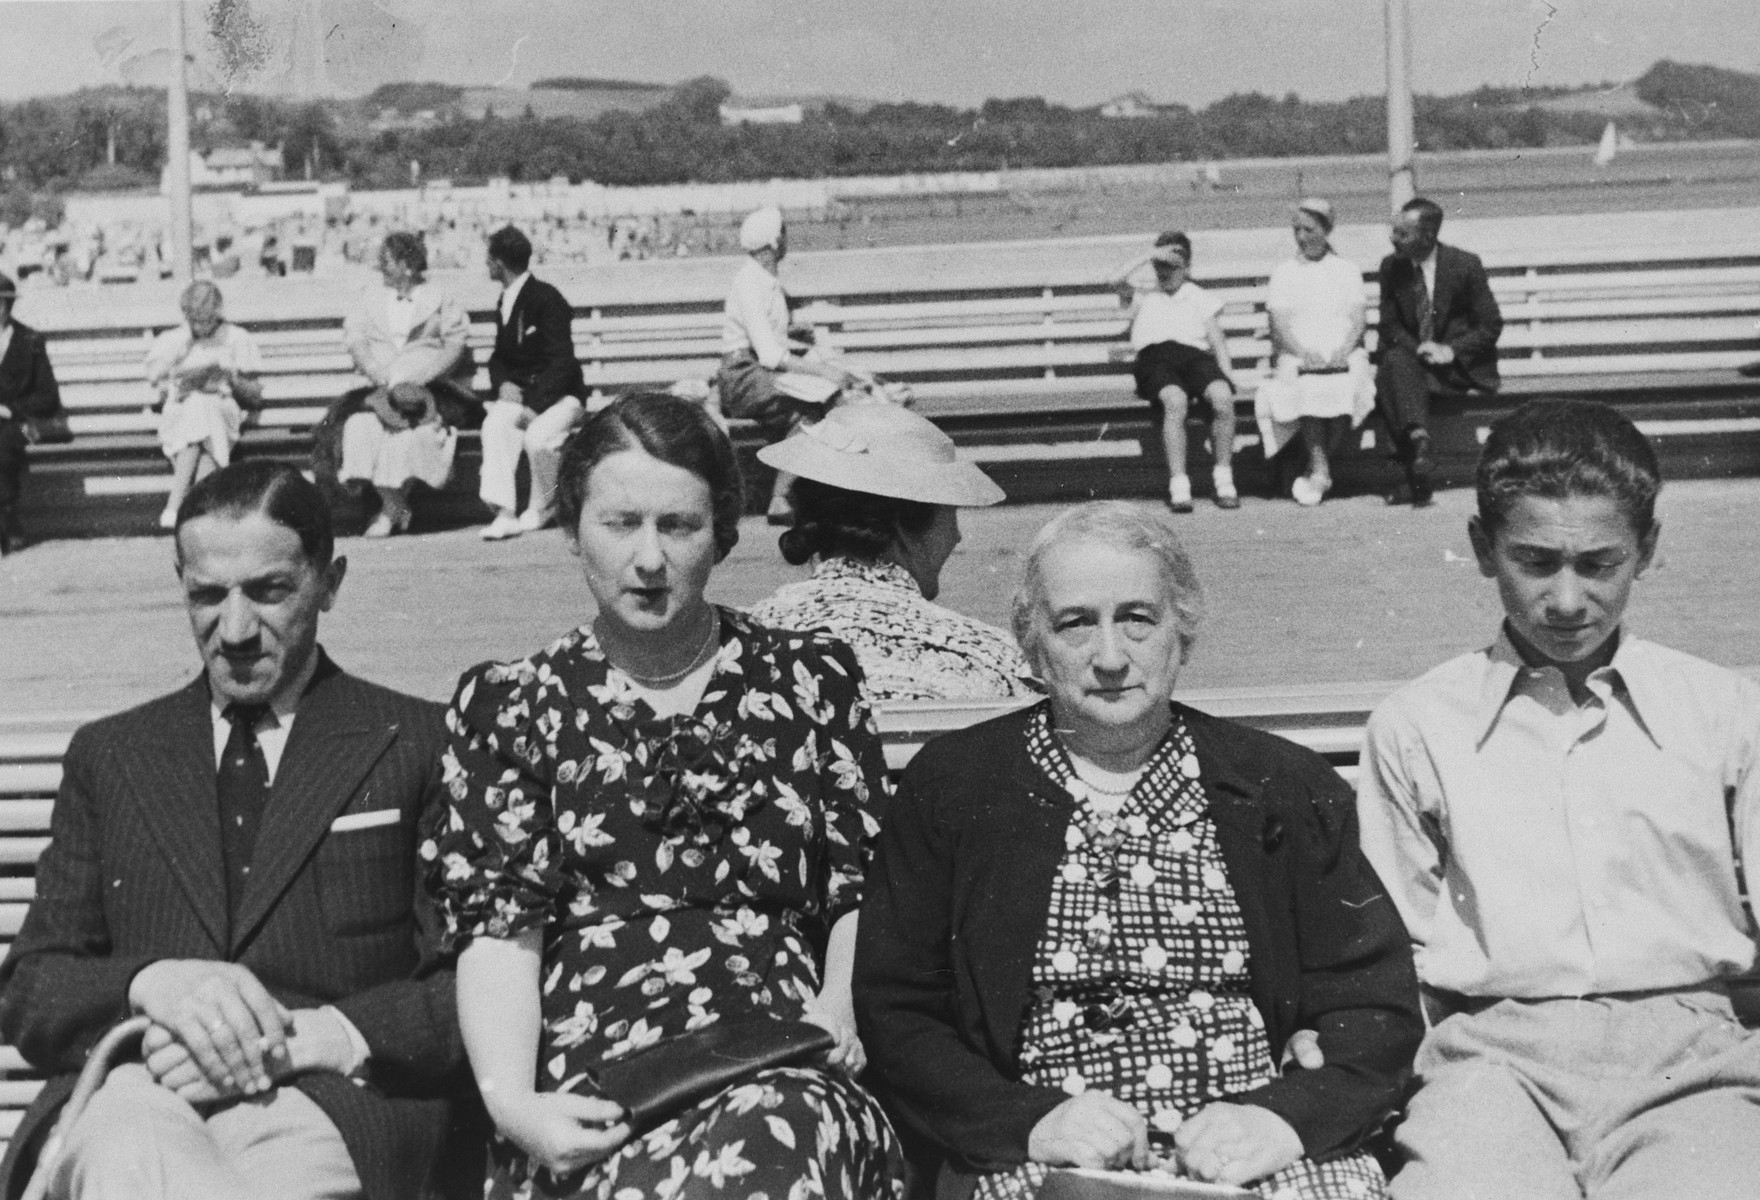 A Polish-Jewish family poses on outdoor benches while on vacation in Sopot.

Pictured from left to right are Julian Ratner, Gustava Ratner, Berta Szrajer, and Marjan Ratner.